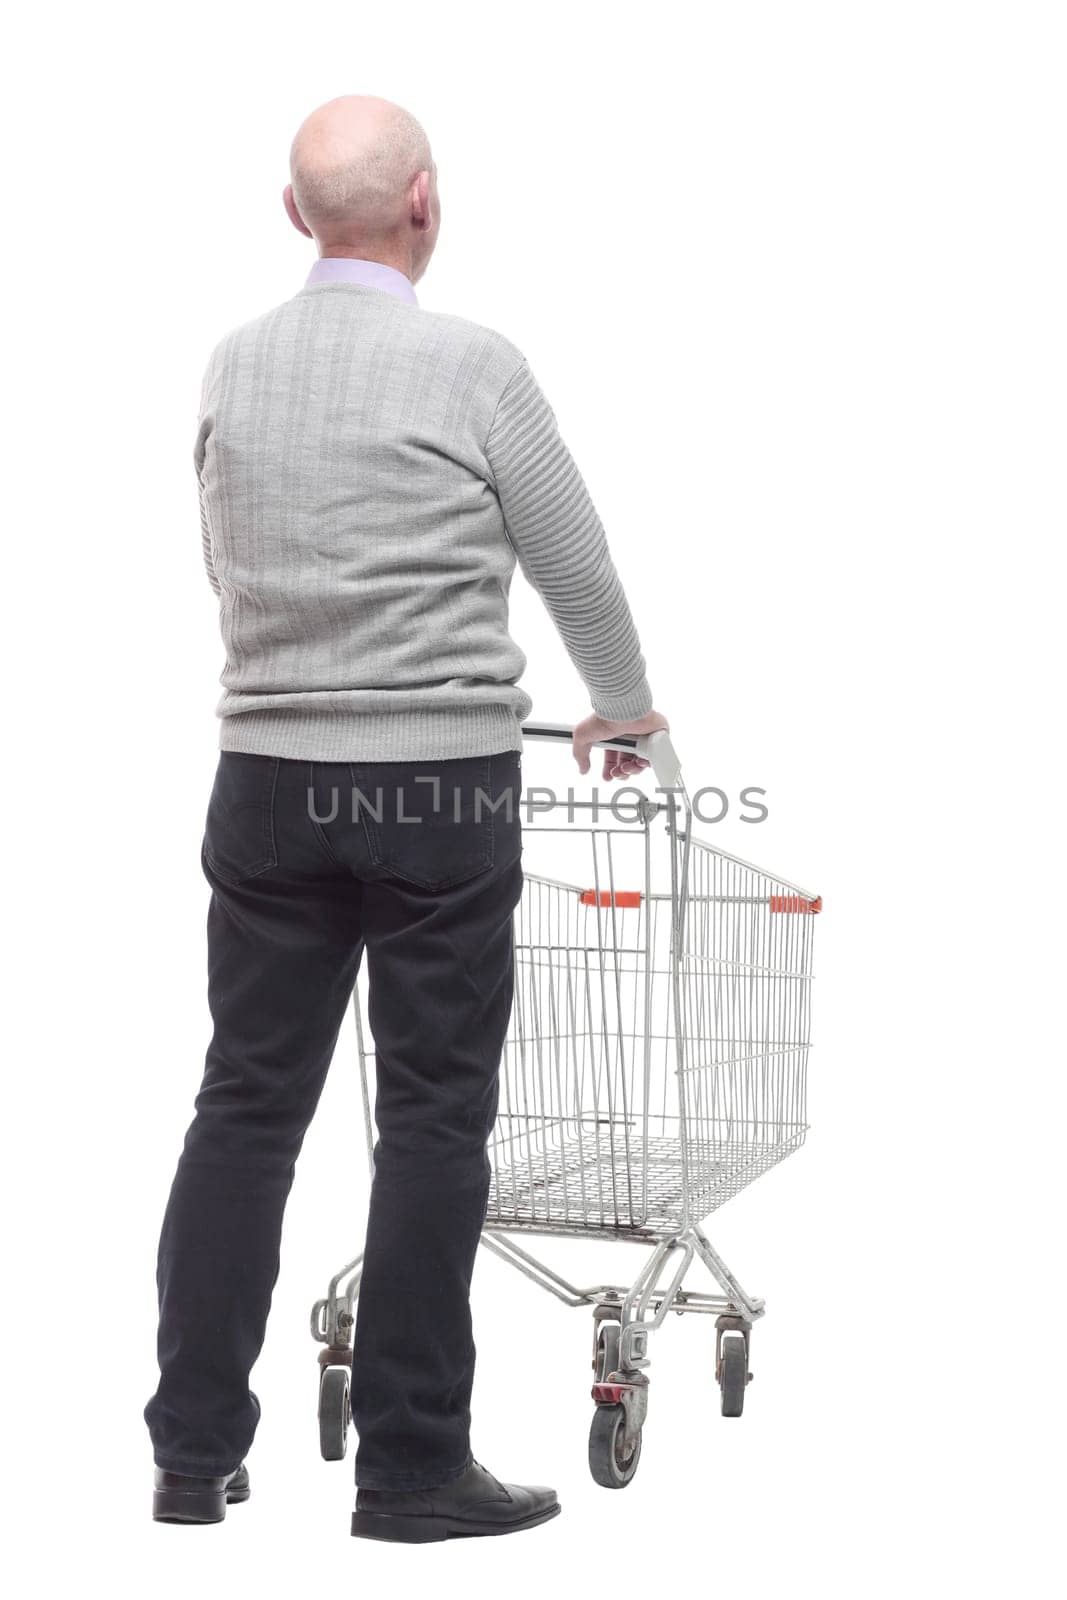 in full growth. a happy man with a shopping cart. by asdf